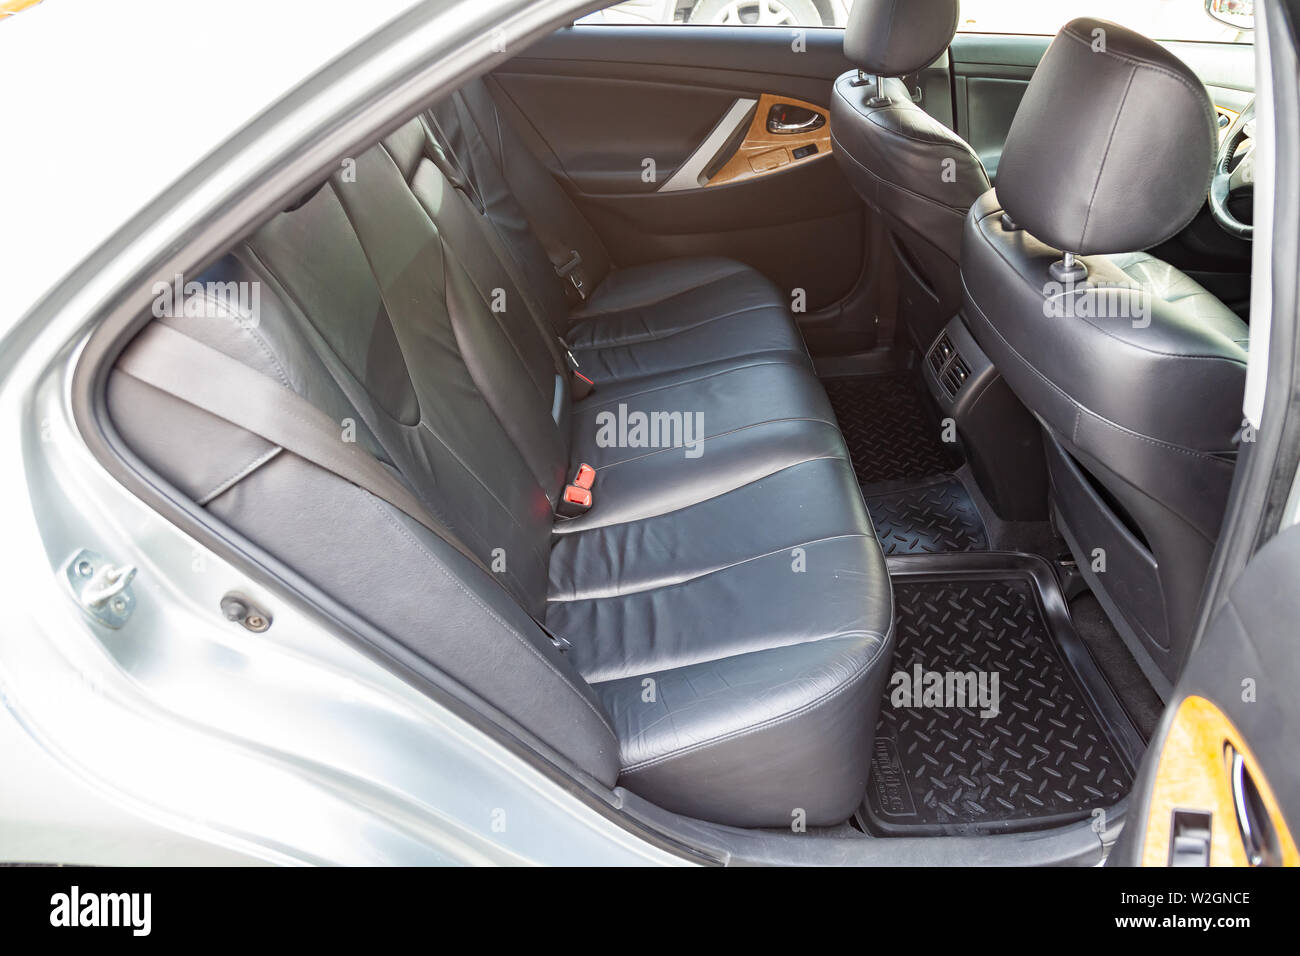 Novosibirsk, Russia - 07.09.2019: View to the interior of Toyota Camry 2006 with dashboard, rear seats, black leather after cleaning before sale on pa Stock Photo